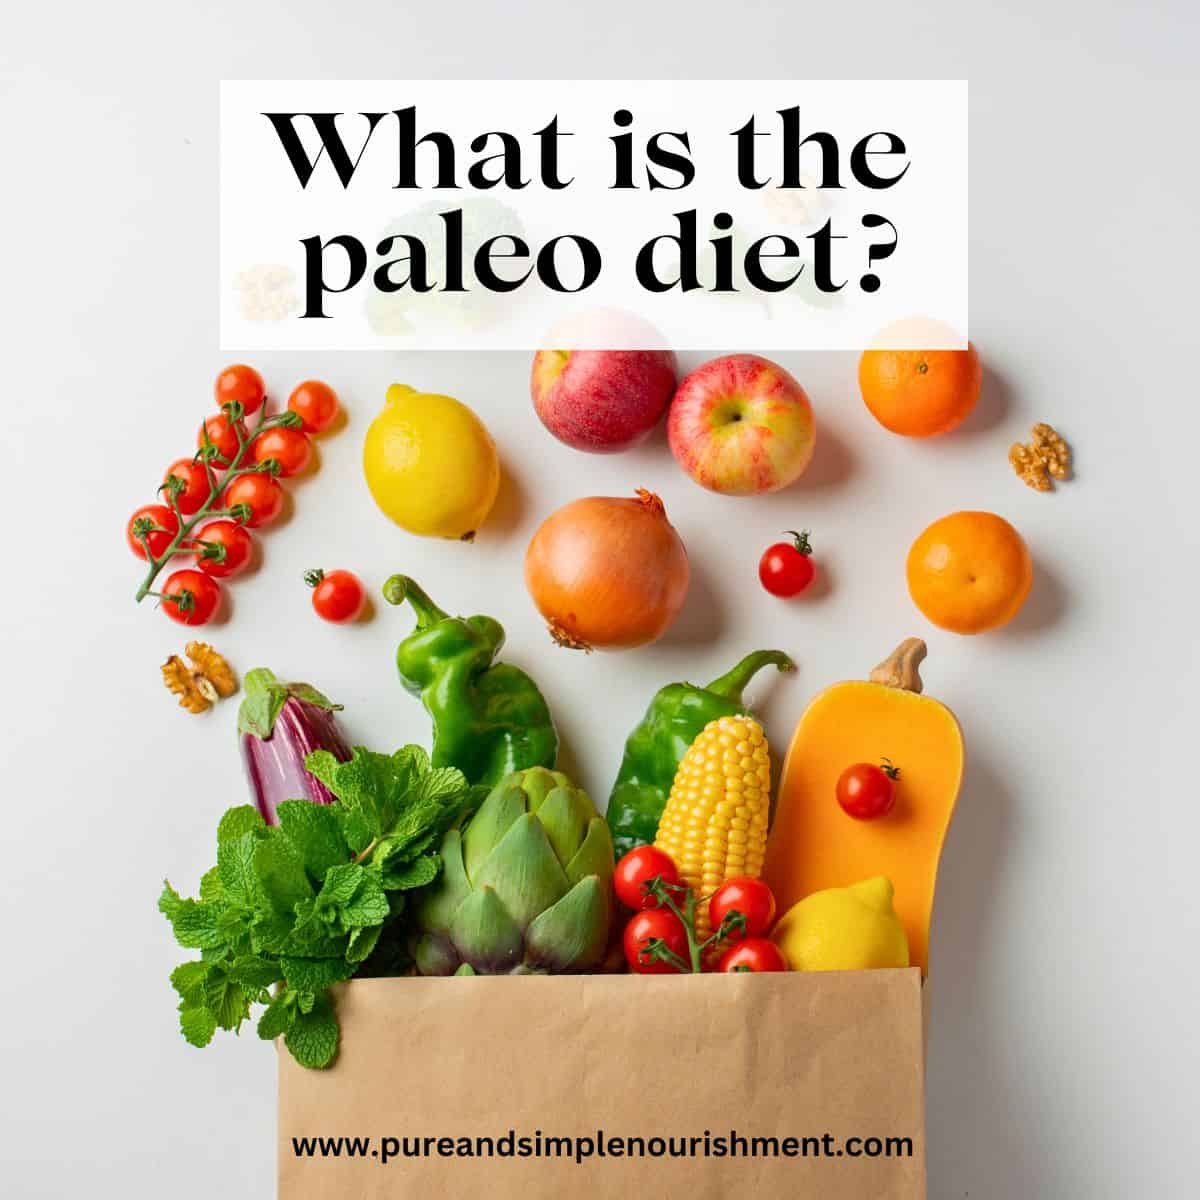 A paper bag with fruits and vegetables spilling out of it and the title What is the paleo diet? over it.